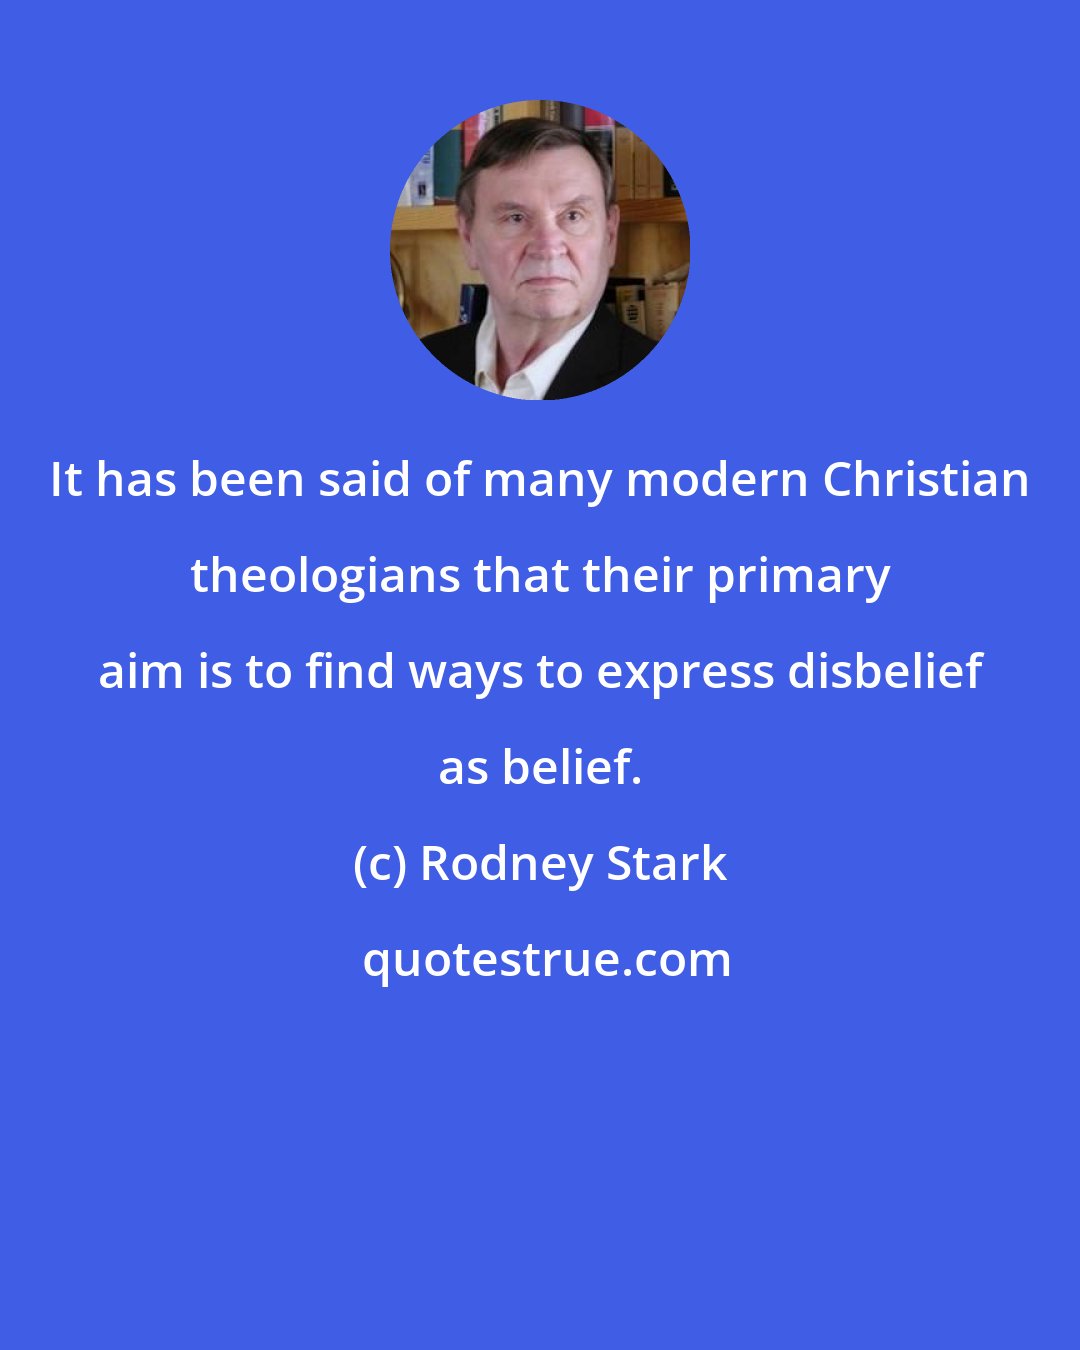 Rodney Stark: It has been said of many modern Christian theologians that their primary aim is to find ways to express disbelief as belief.